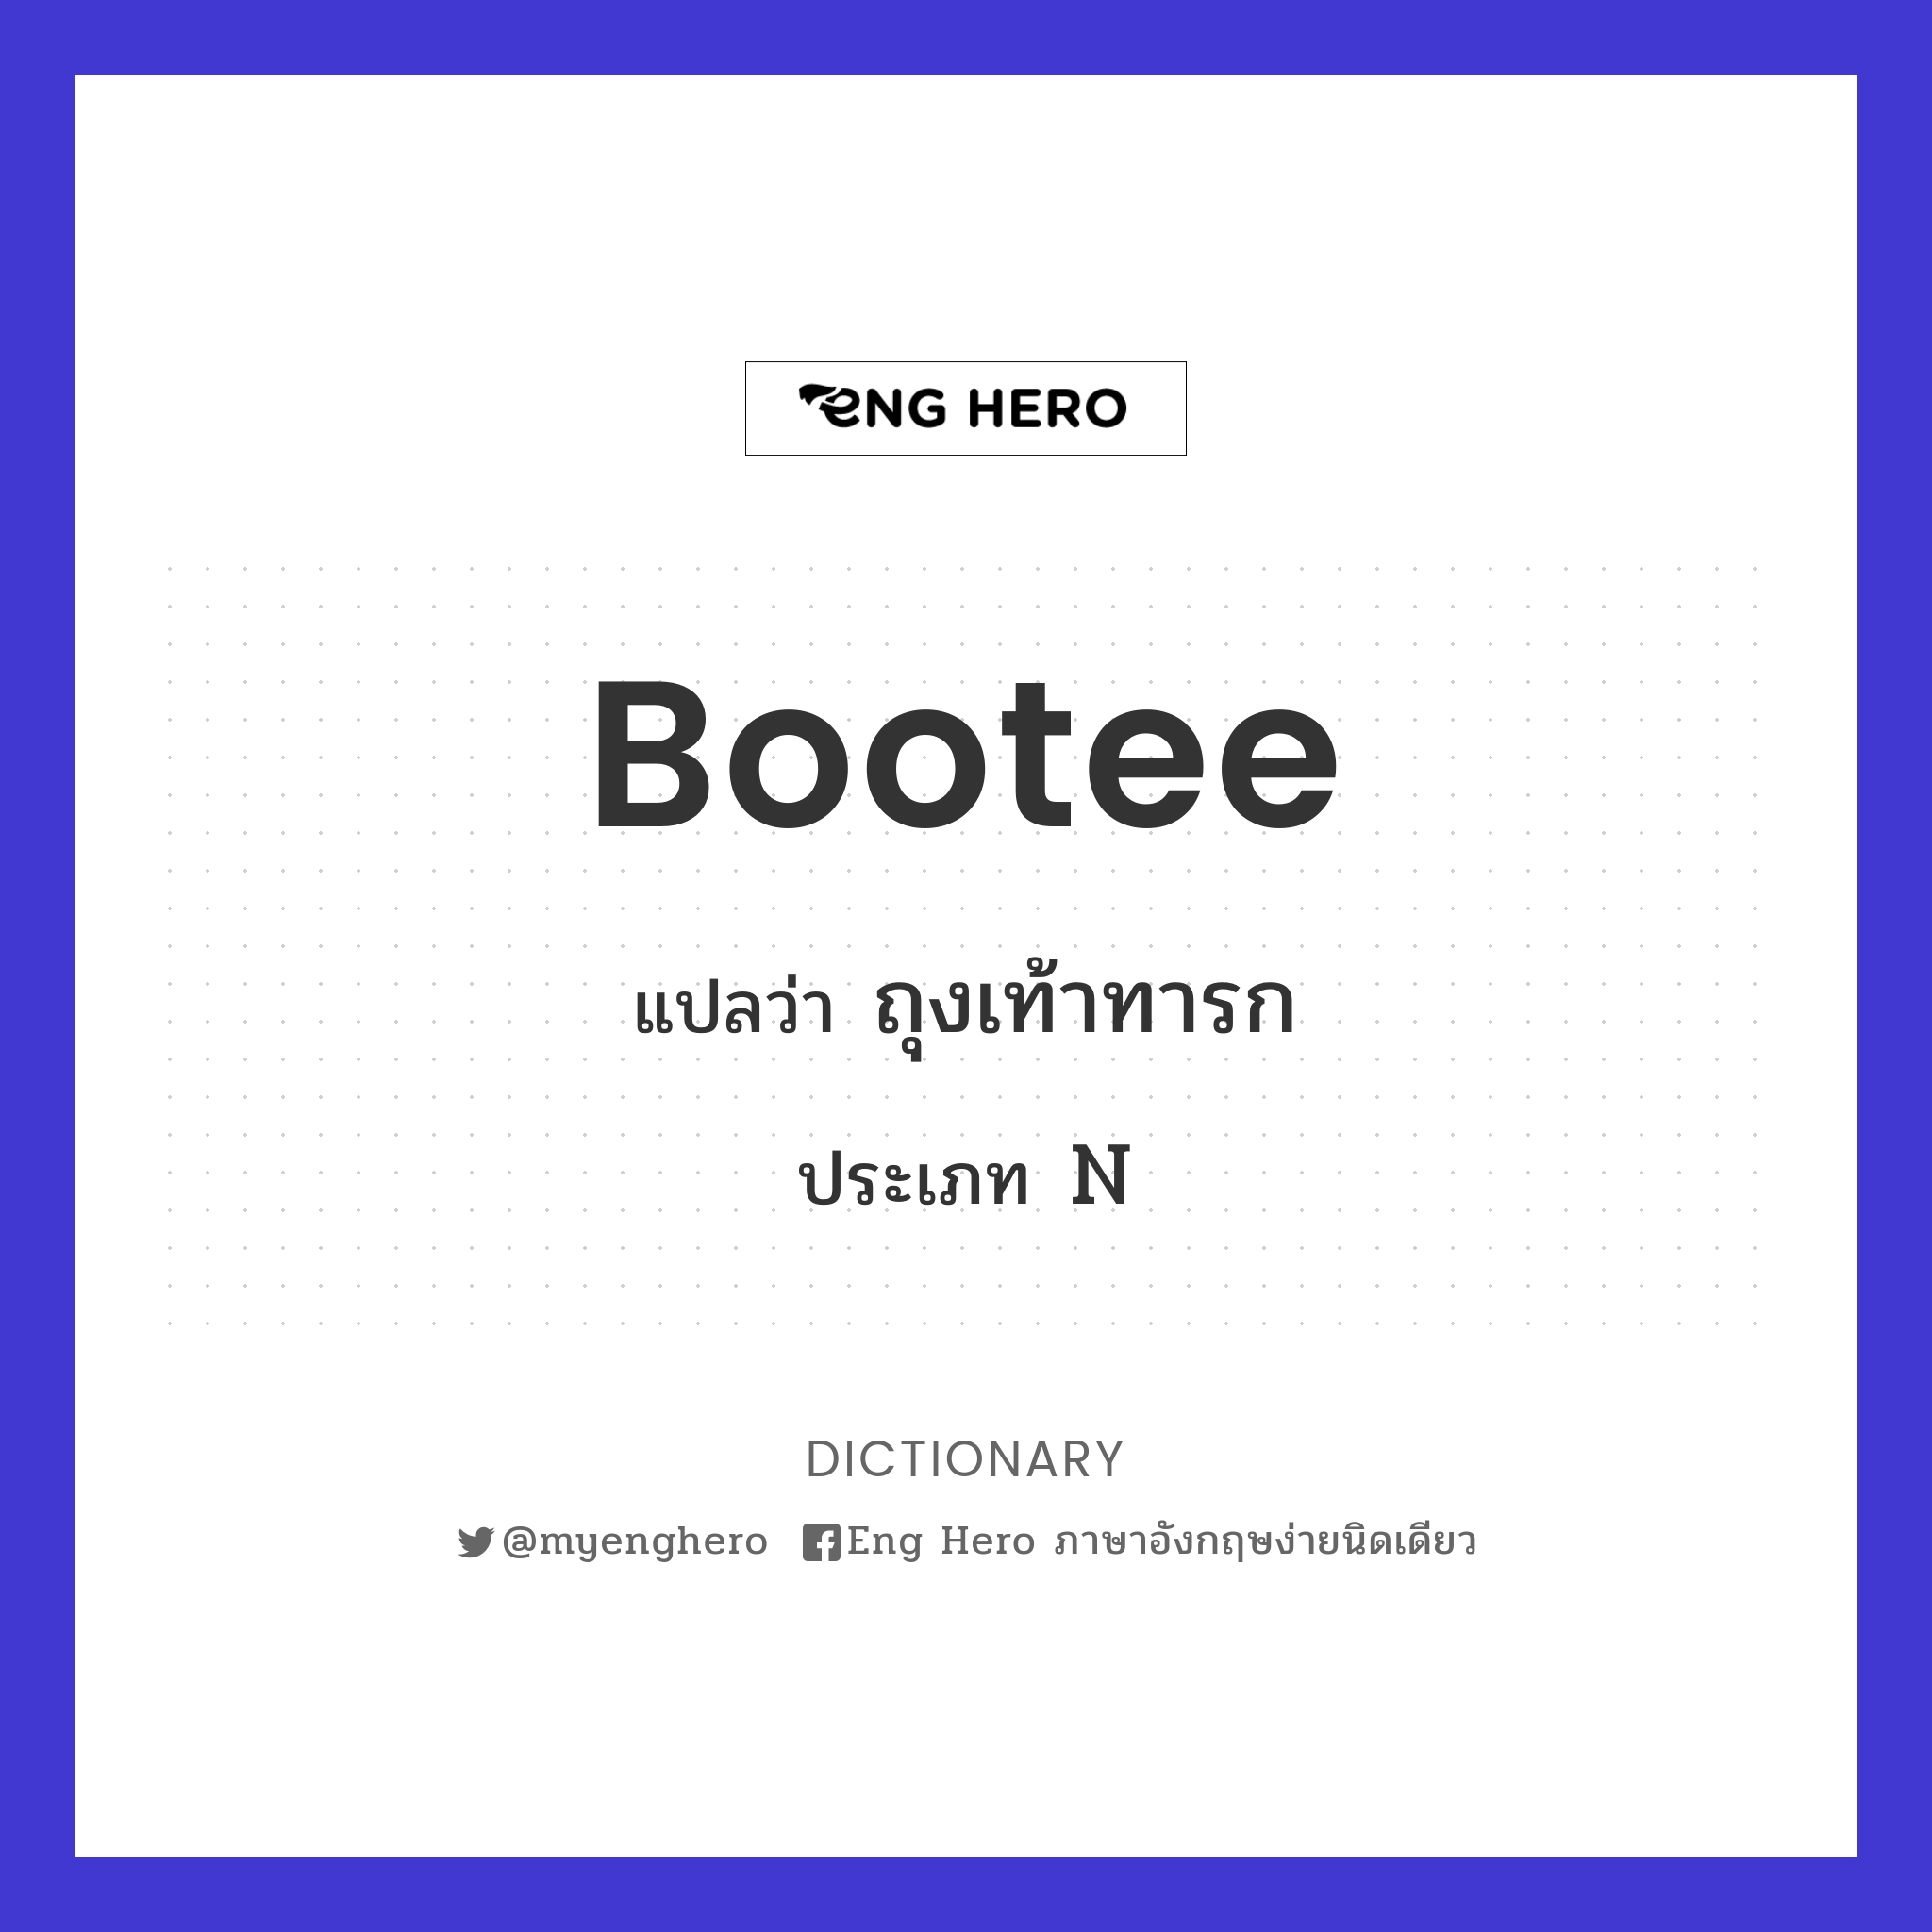 bootee